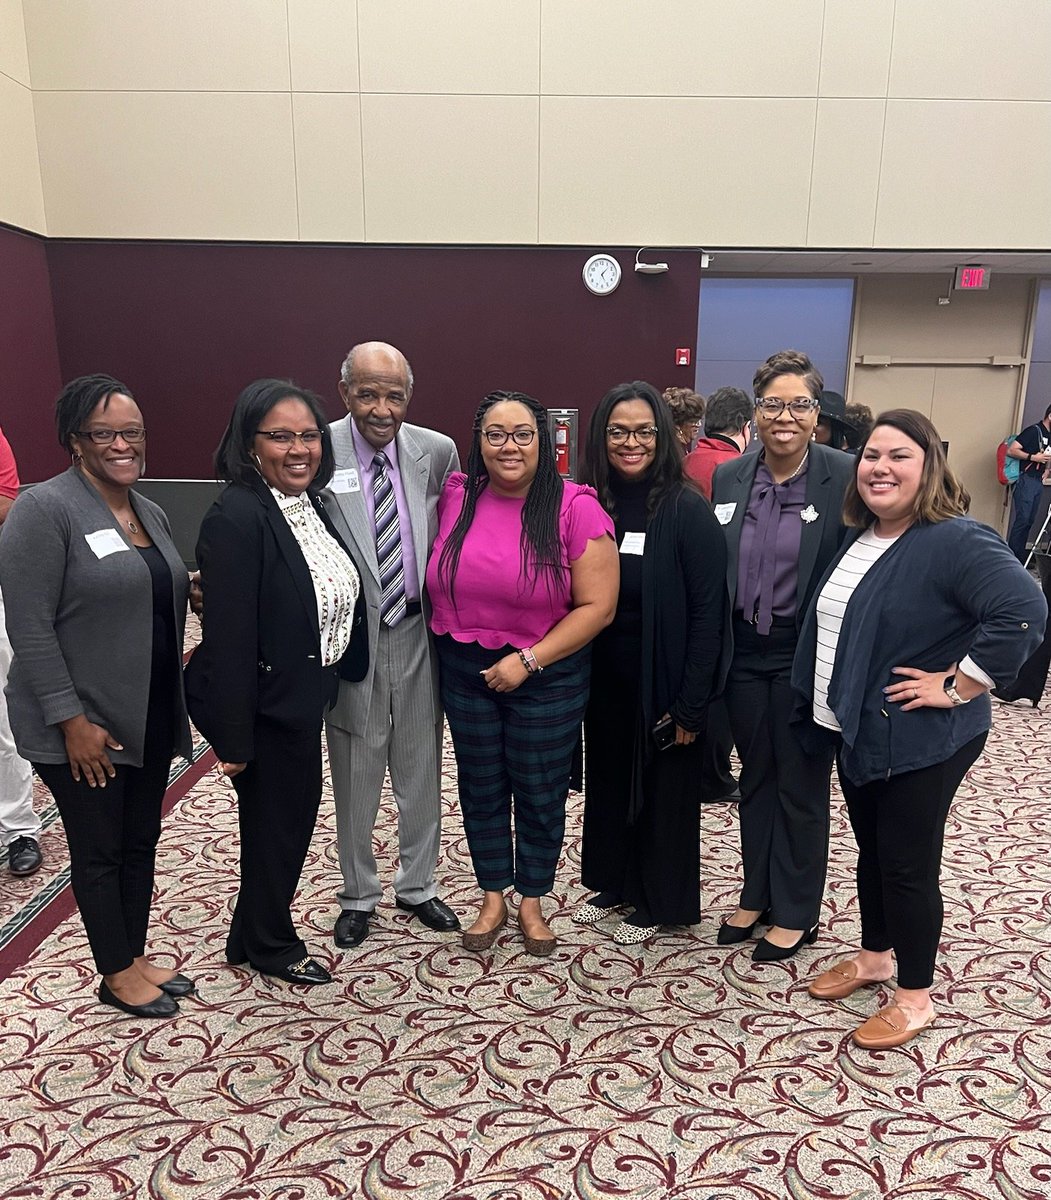 What a wonderful, amazing day at the Color of Education Summit! We got a pic with Dr Dudley Flood! #ColorofEducation @theNCForum @DudleyFloodCtr @mellottahill1 @sabrinasteig @KHill_educator @LatreiciaAllen @MsTMJohnson @CCSSuptConnelly @A_Kazouh @DrWilsonNorman @CumberlandCoSch